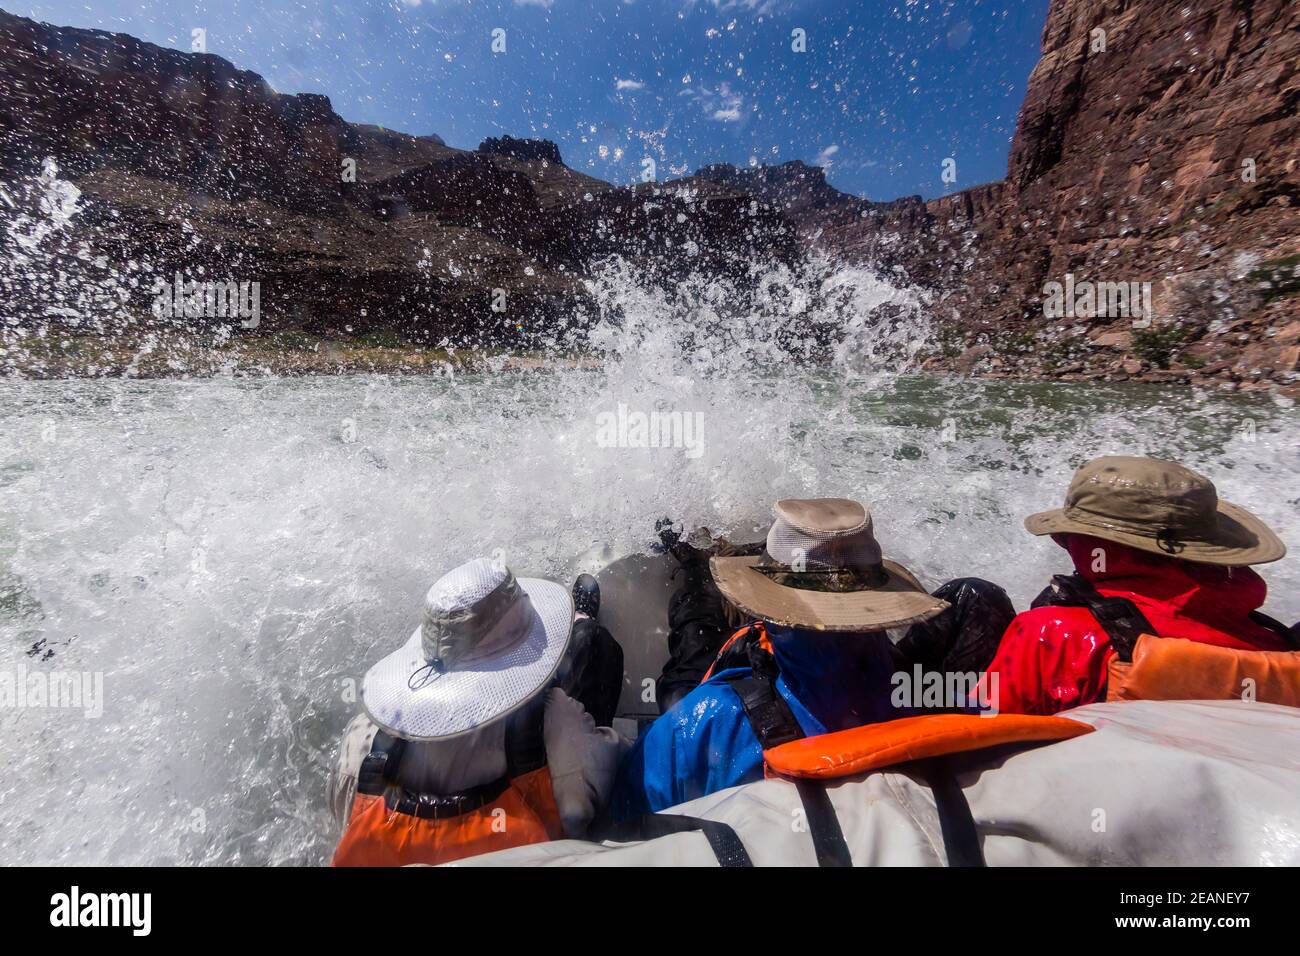 Shooting the rapids in a raft on the Colorado River, Grand Canyon National Park, UNESCO World Heritage Site, Arizona, United States of America Stock Photo